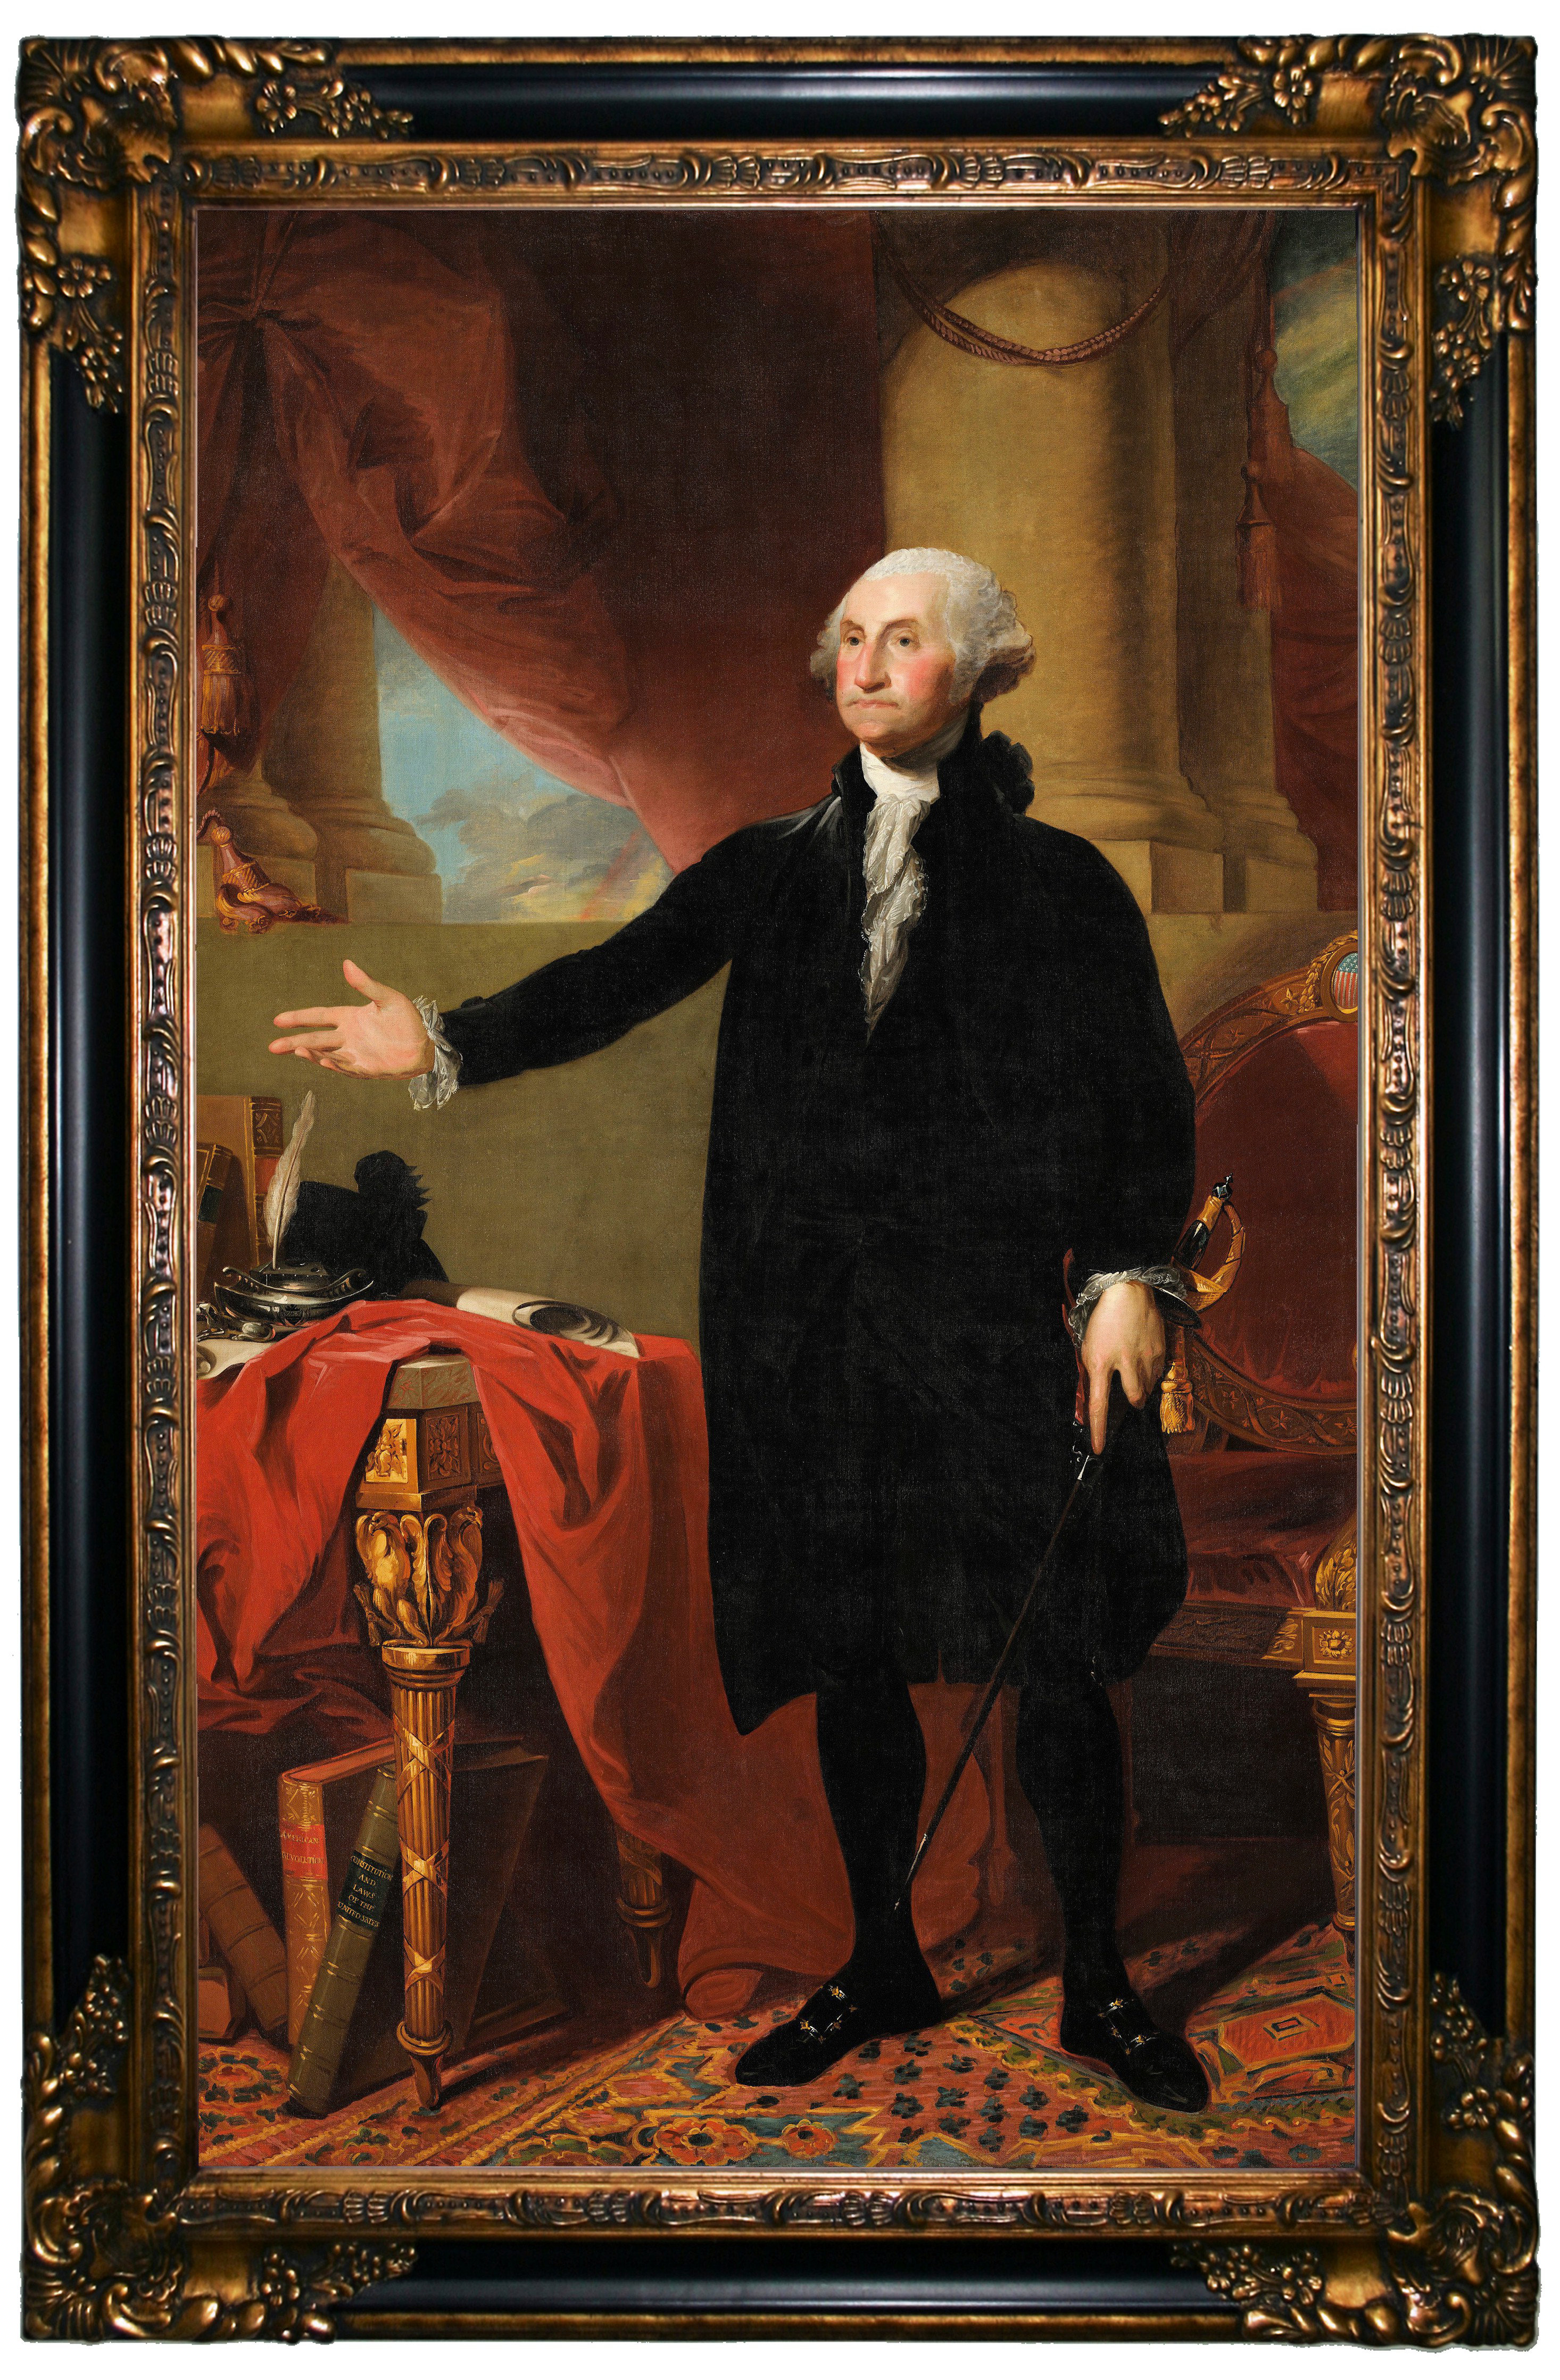 Digitally Restored American History Print of General George Washington | Large Stretched Canvas, Black Floating Frame Wall Art Print | Great Big Ca